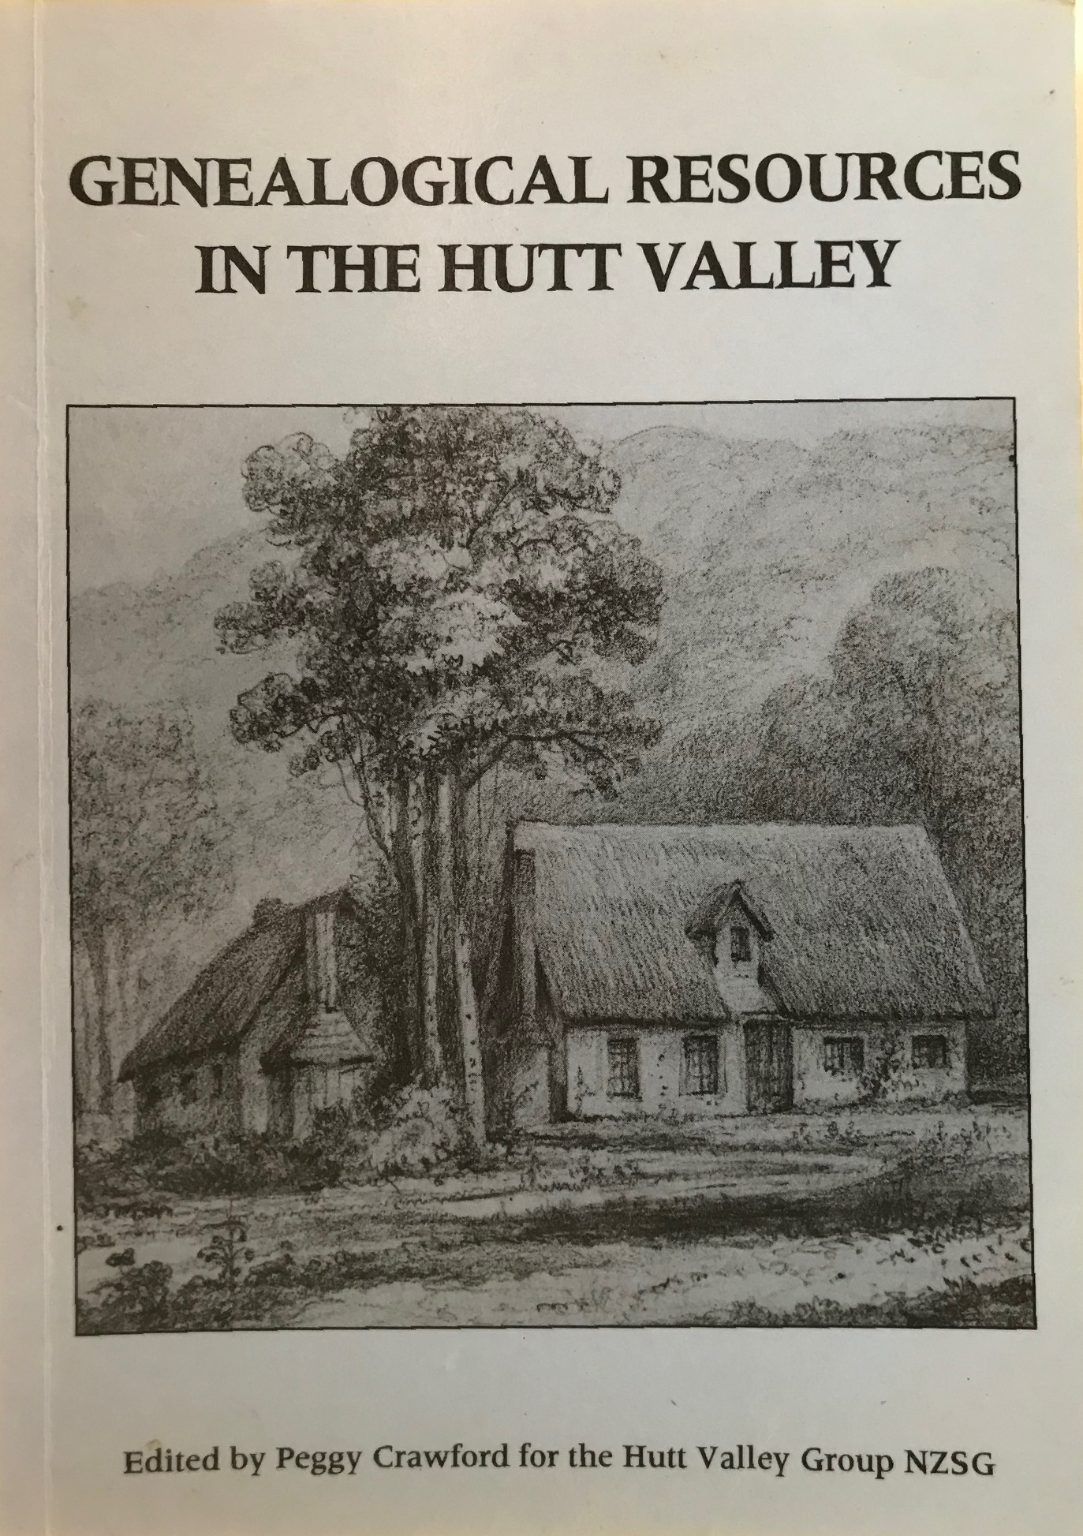 GENEALOGICAL RESOURCES IN THE HUTT VALLEY